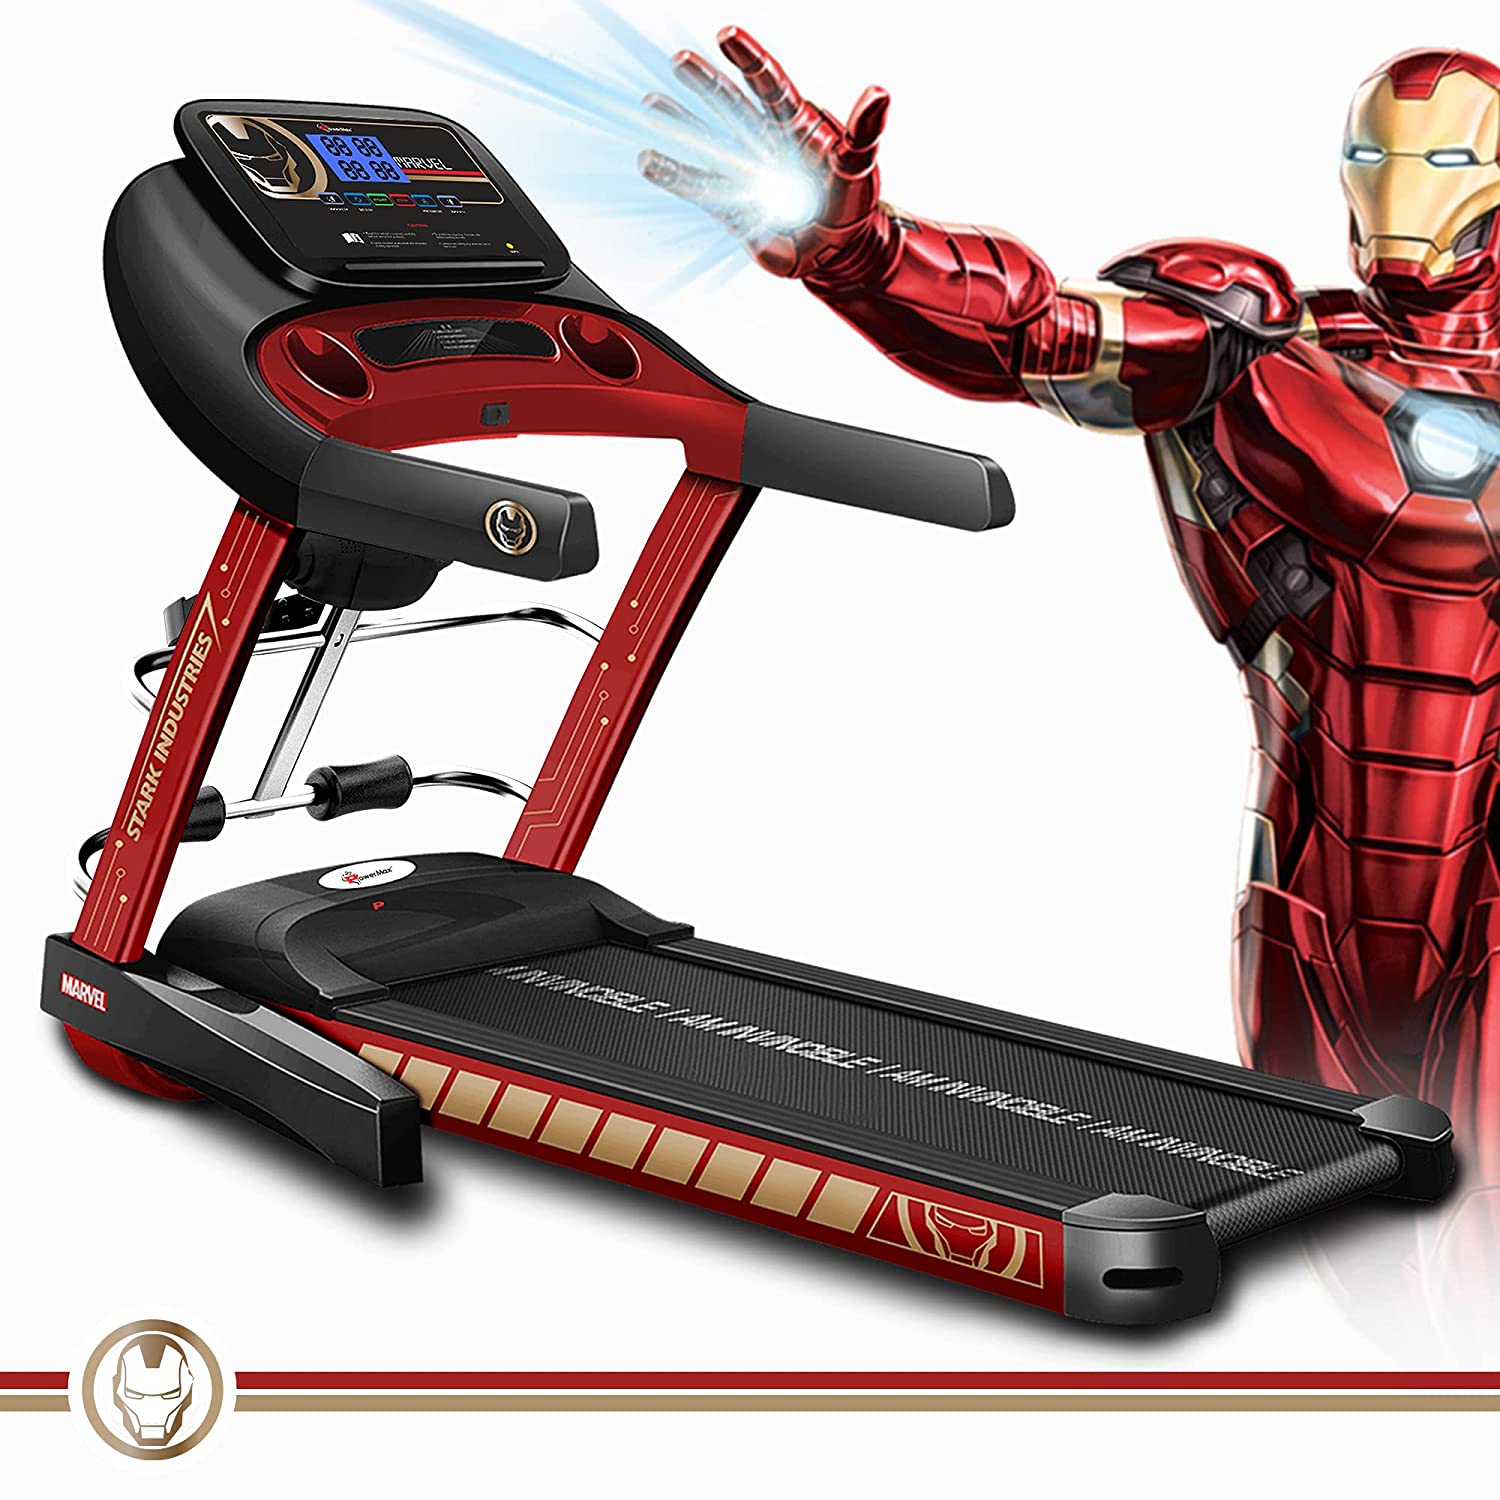 MT-1M Motorized Treadmill with Android & iOS Application